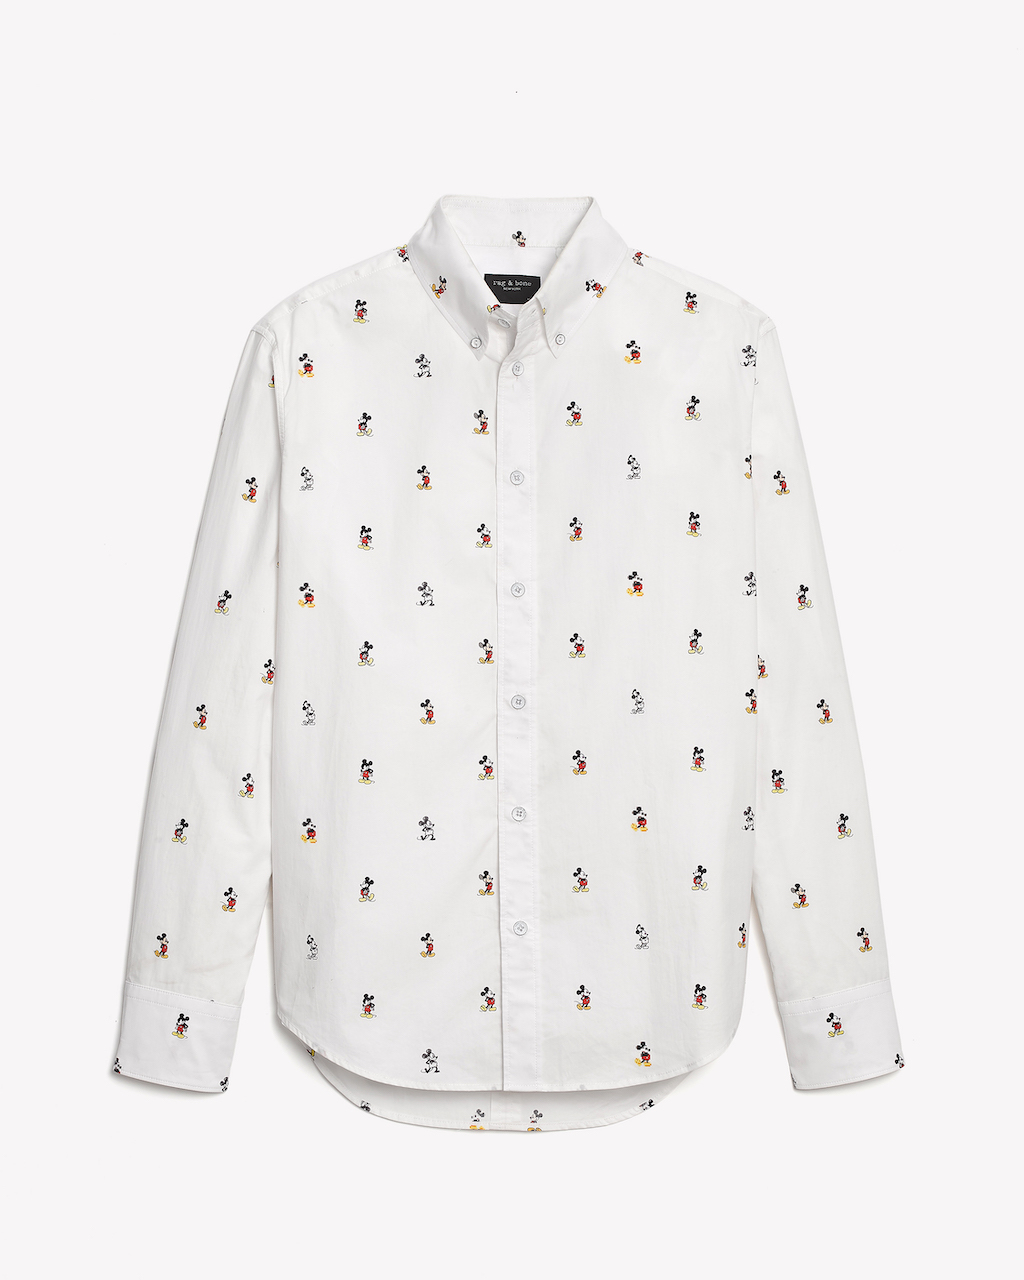 rag & bone x Disney Mickey Mouse Collection - LaughingPlace.com